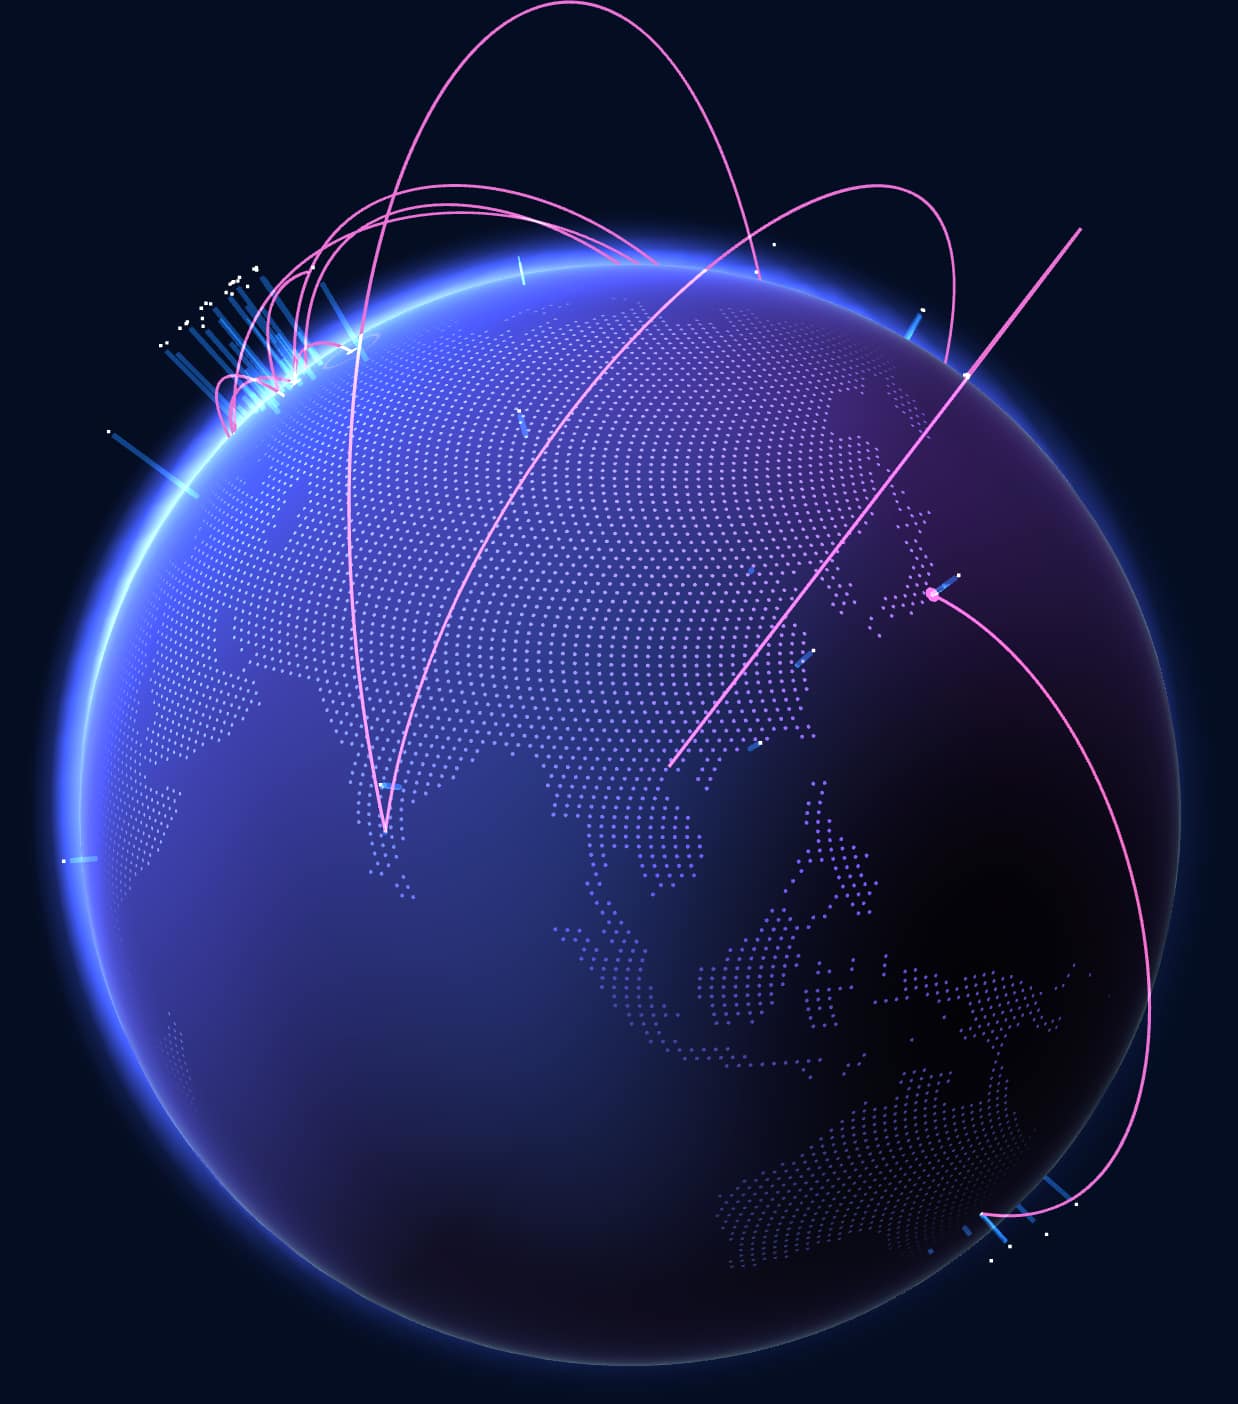 Planet earth with visualization of GitHub activity crossing the globe